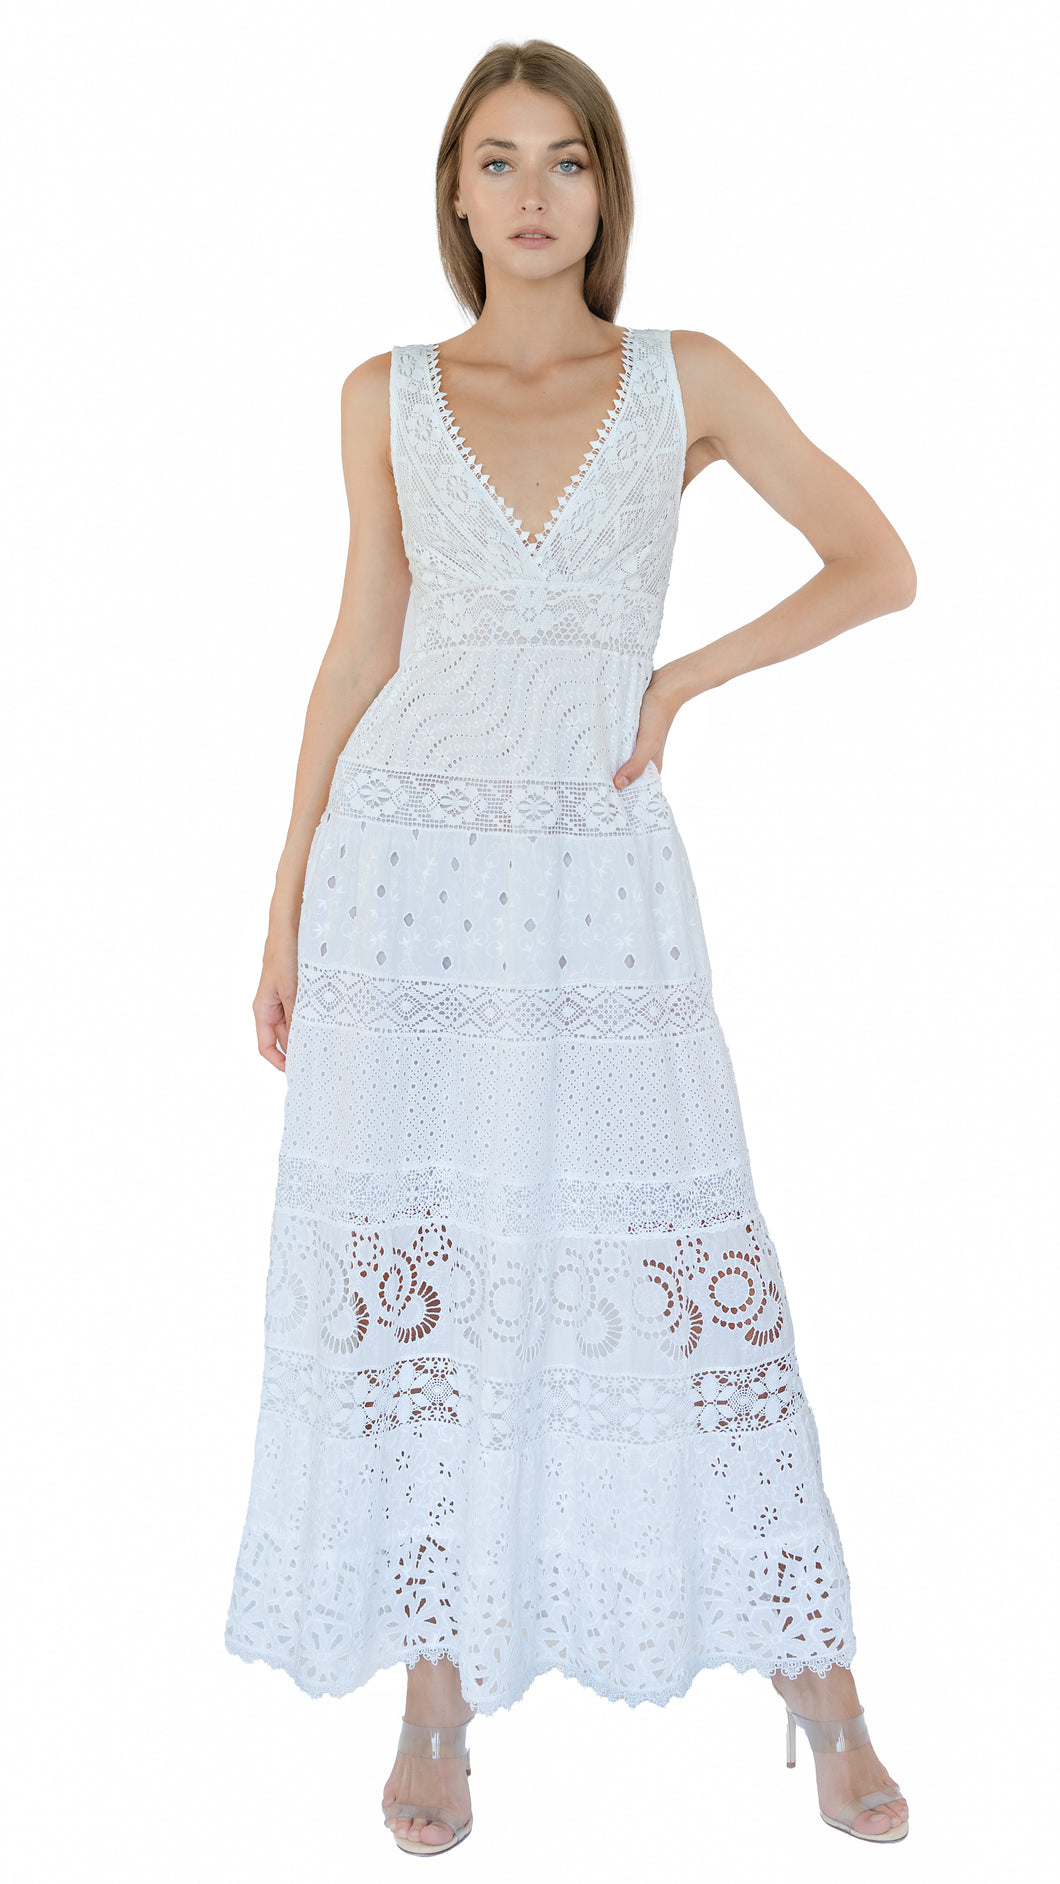 Temptation Positano Long maxi dress with crochet lace trim, a scallop plunge v-neckline with a smocked empire waist and pom pom trim in white